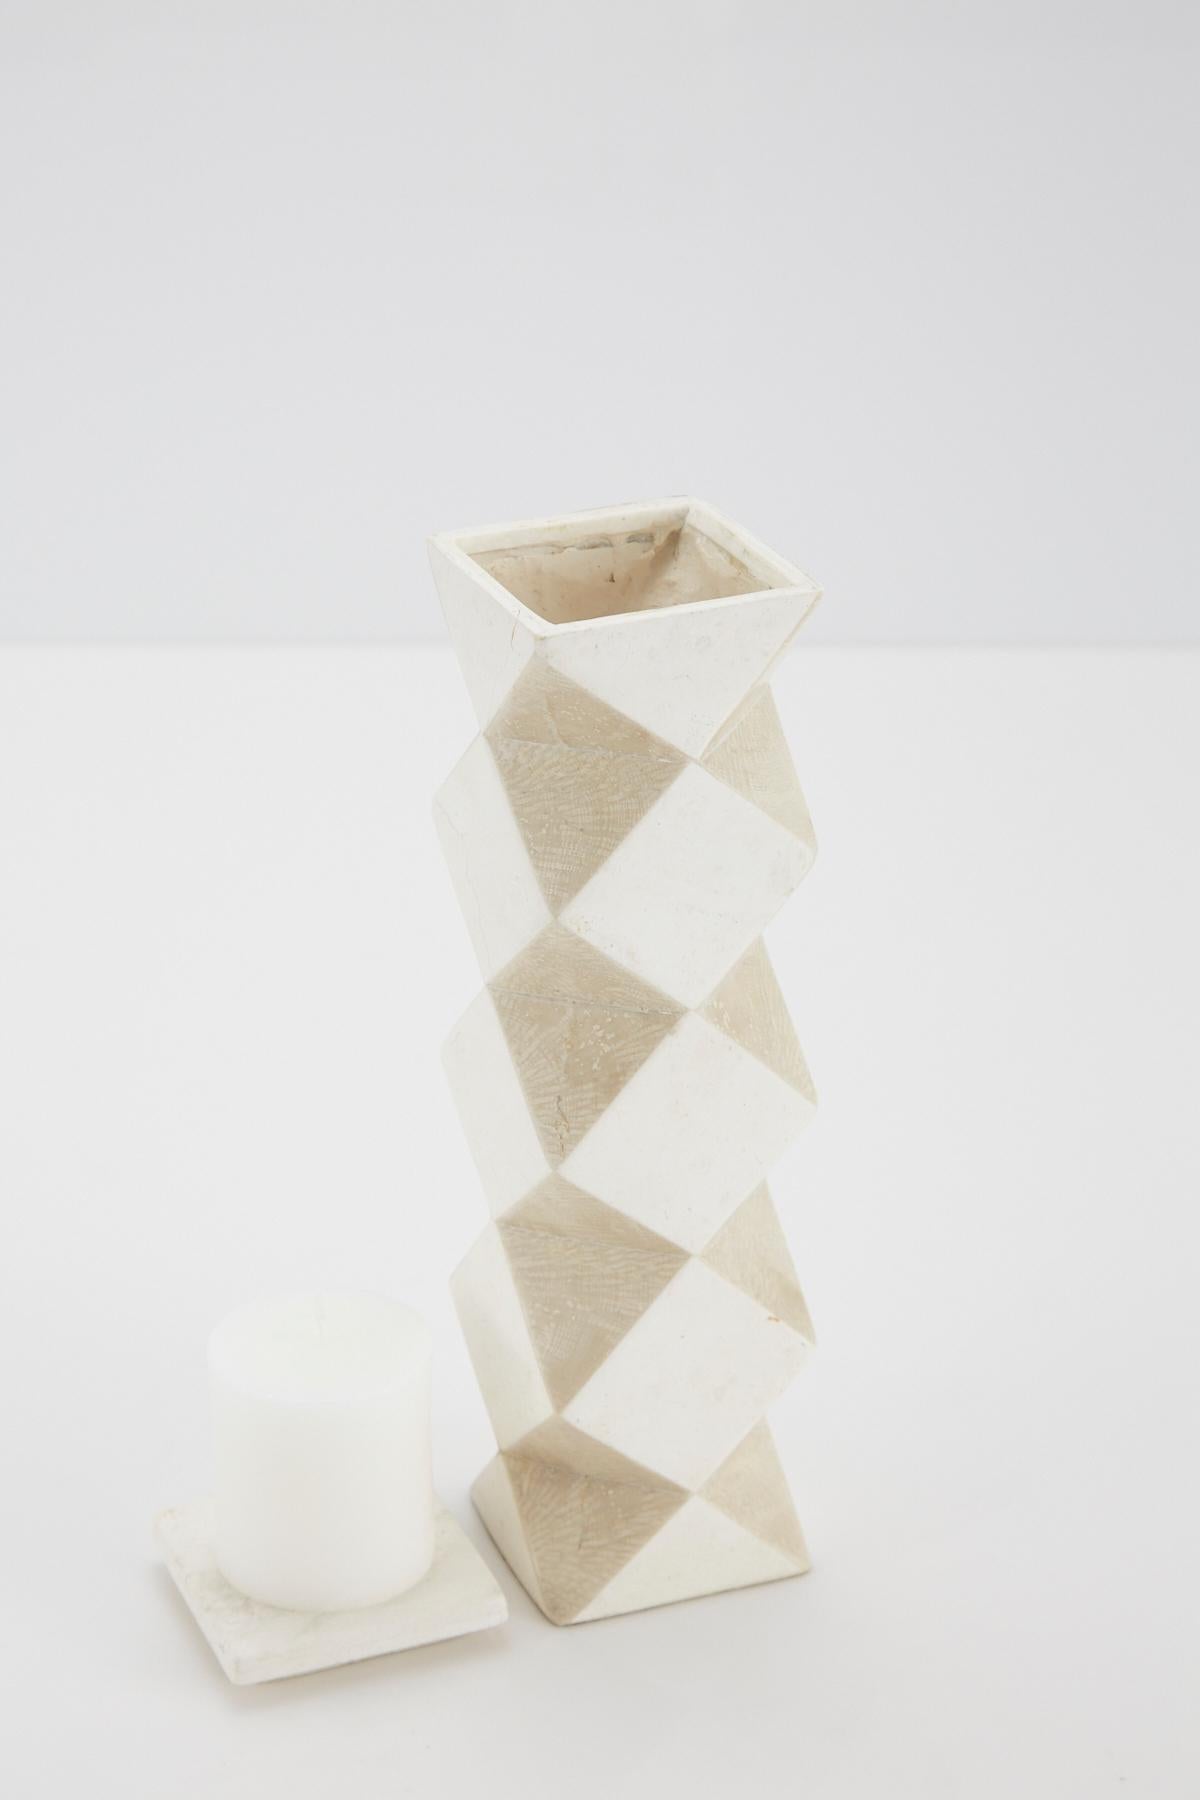 Painted Convertible Faceted Postmodern Tessellated Stone Candlestick or Vase, 1990s For Sale